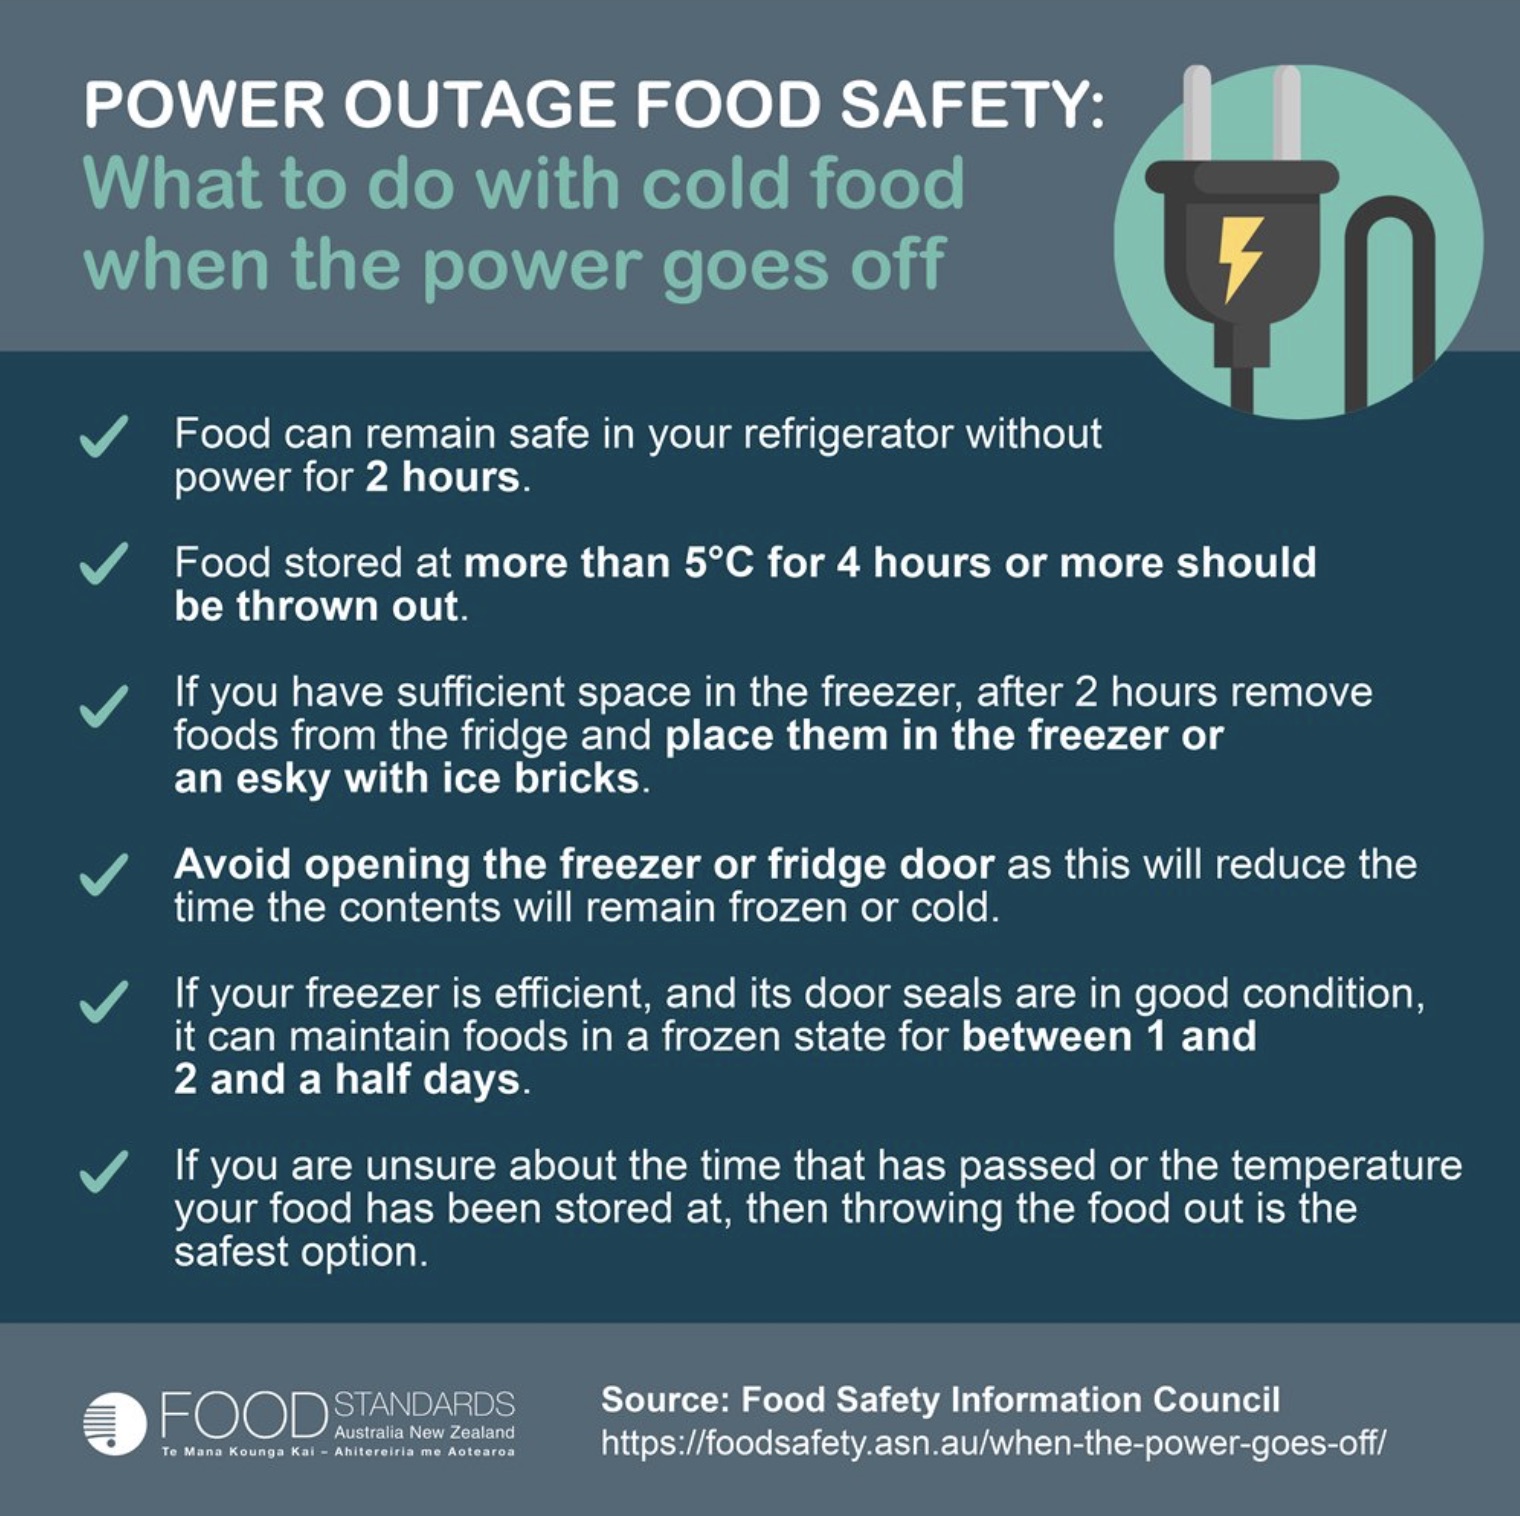 Here's what do with refrigerated food if the power is out